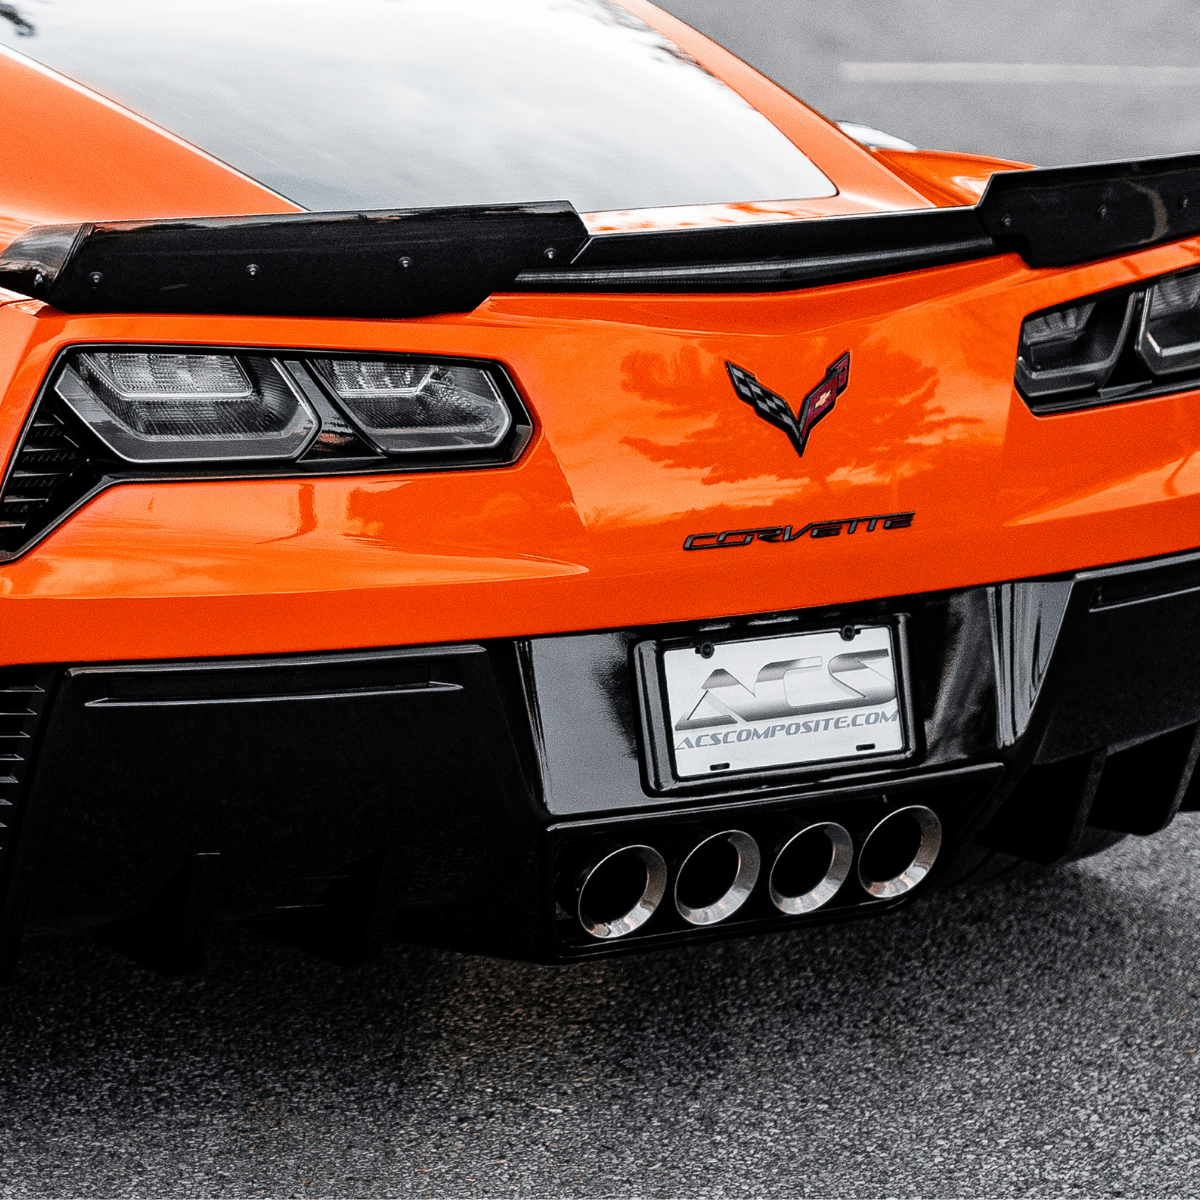 Carbon Flash Black Corvette License Plate Frame with SKU 45-4-244 by ACS Composite for C7 and C8 Corvettes